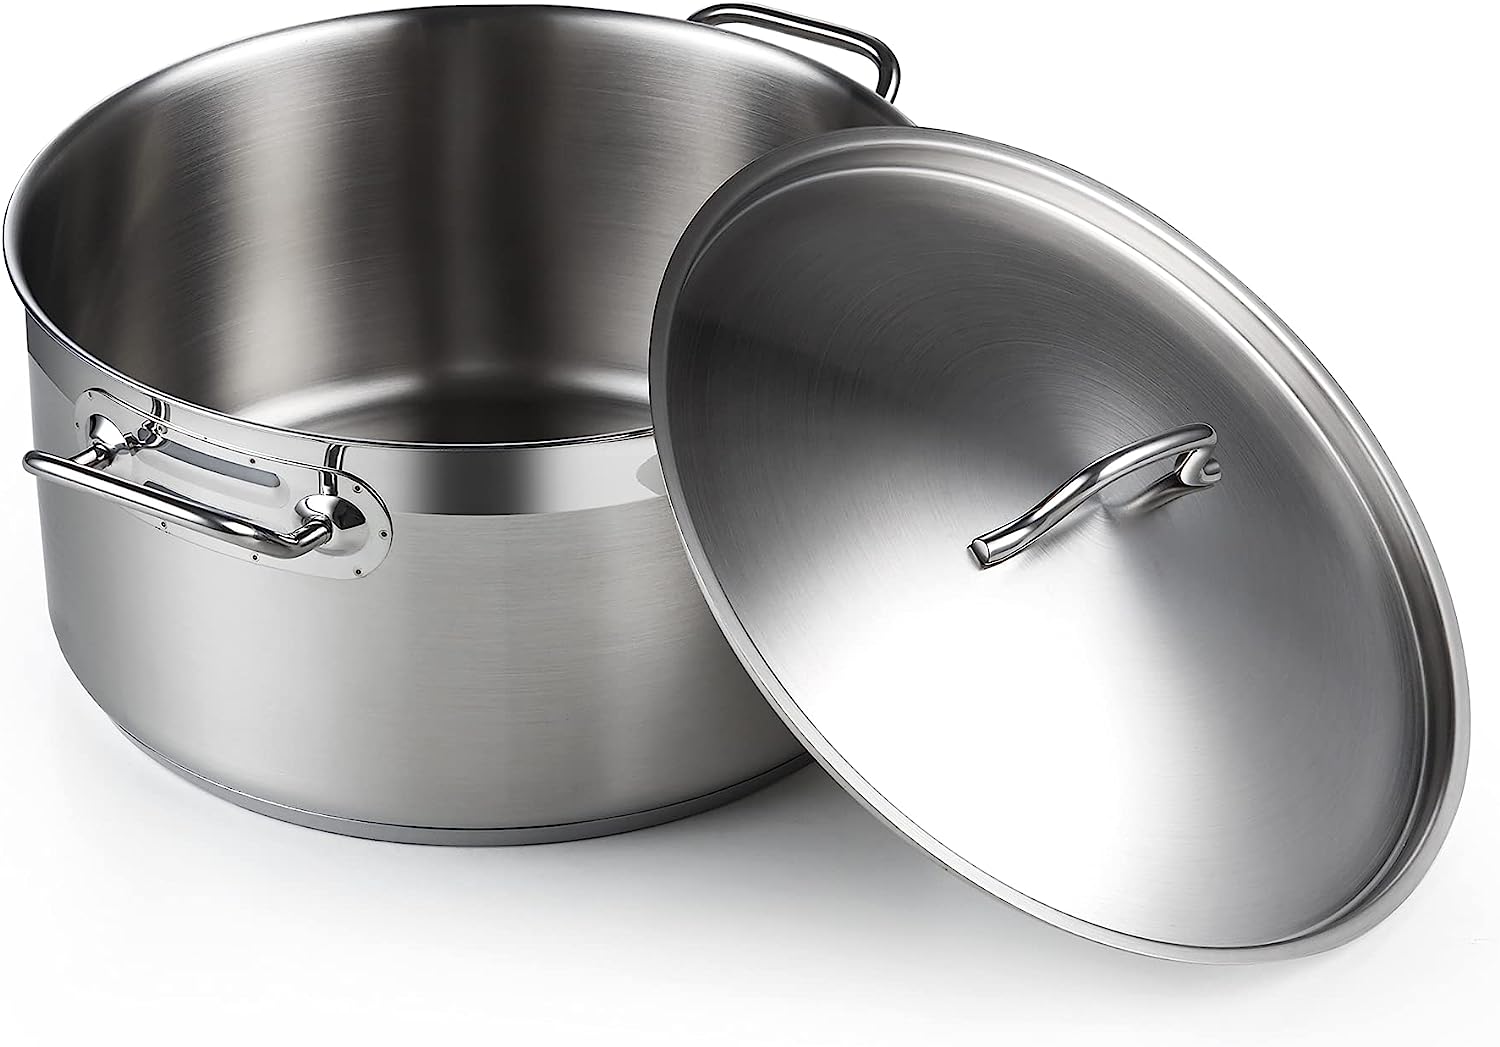 https://bigbigmart.com/wp-content/uploads/2023/06/Cooks-Standard-Dutch-Oven-with-Lid-9-Quart-Professional-Stainless-Steel-Stockpots-Silver2.jpg